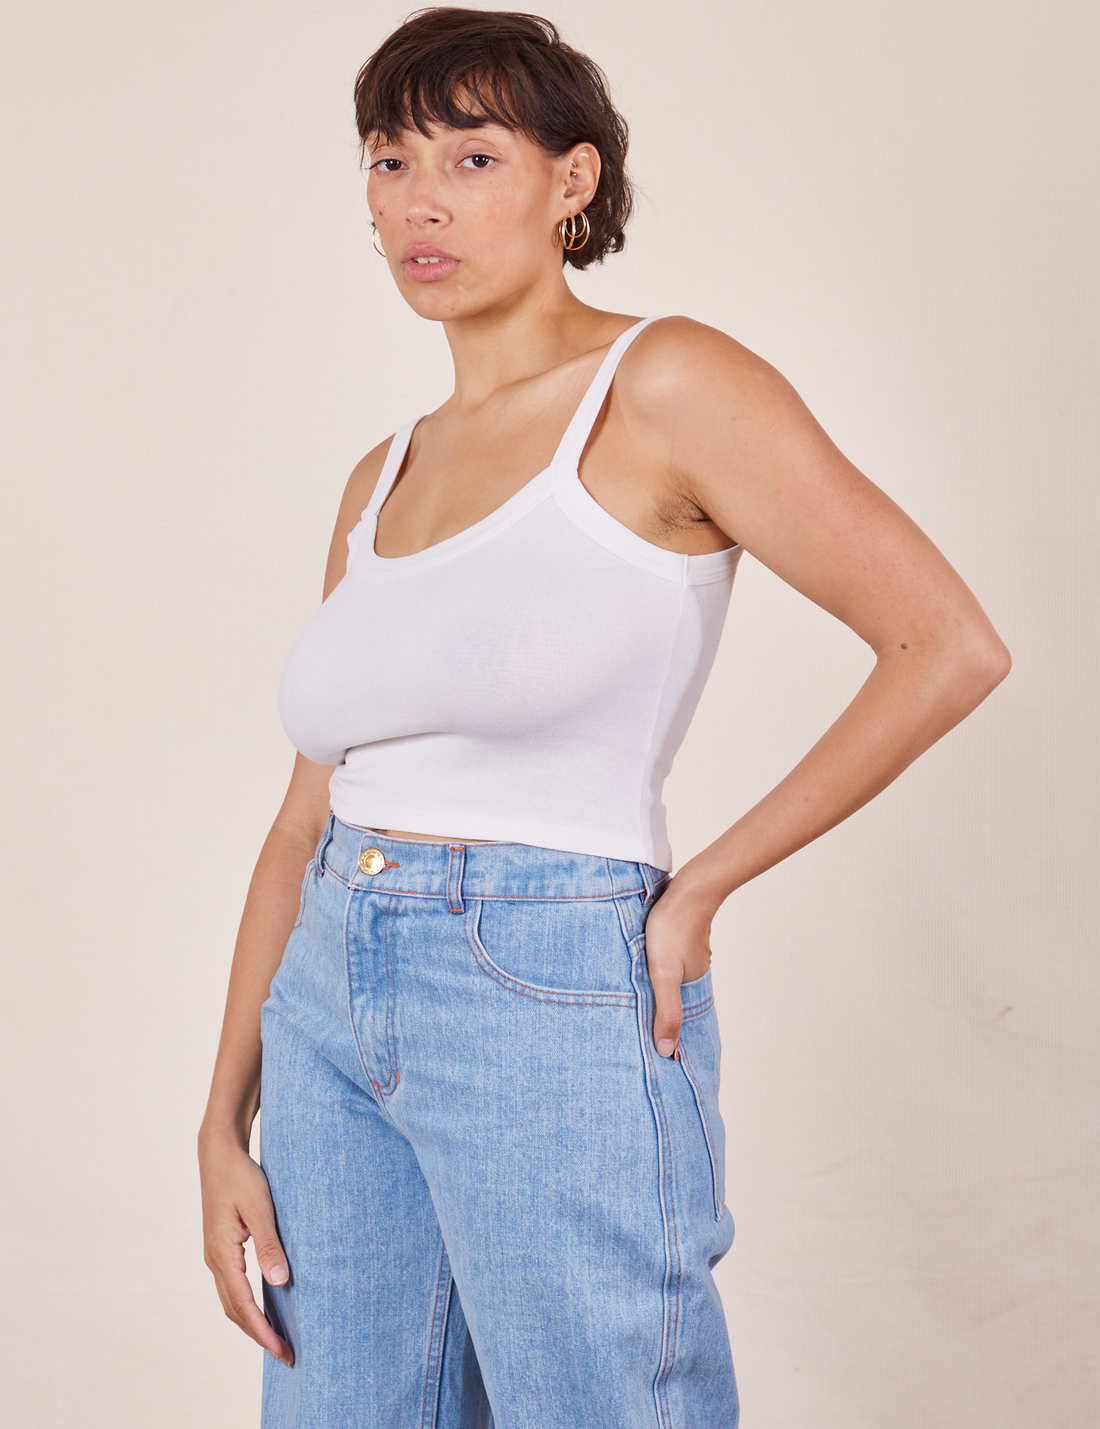 Tiara is 5'4" and wearing XS Cropped Cami in Vintage Off-White paired with light wash Sailor Jeans